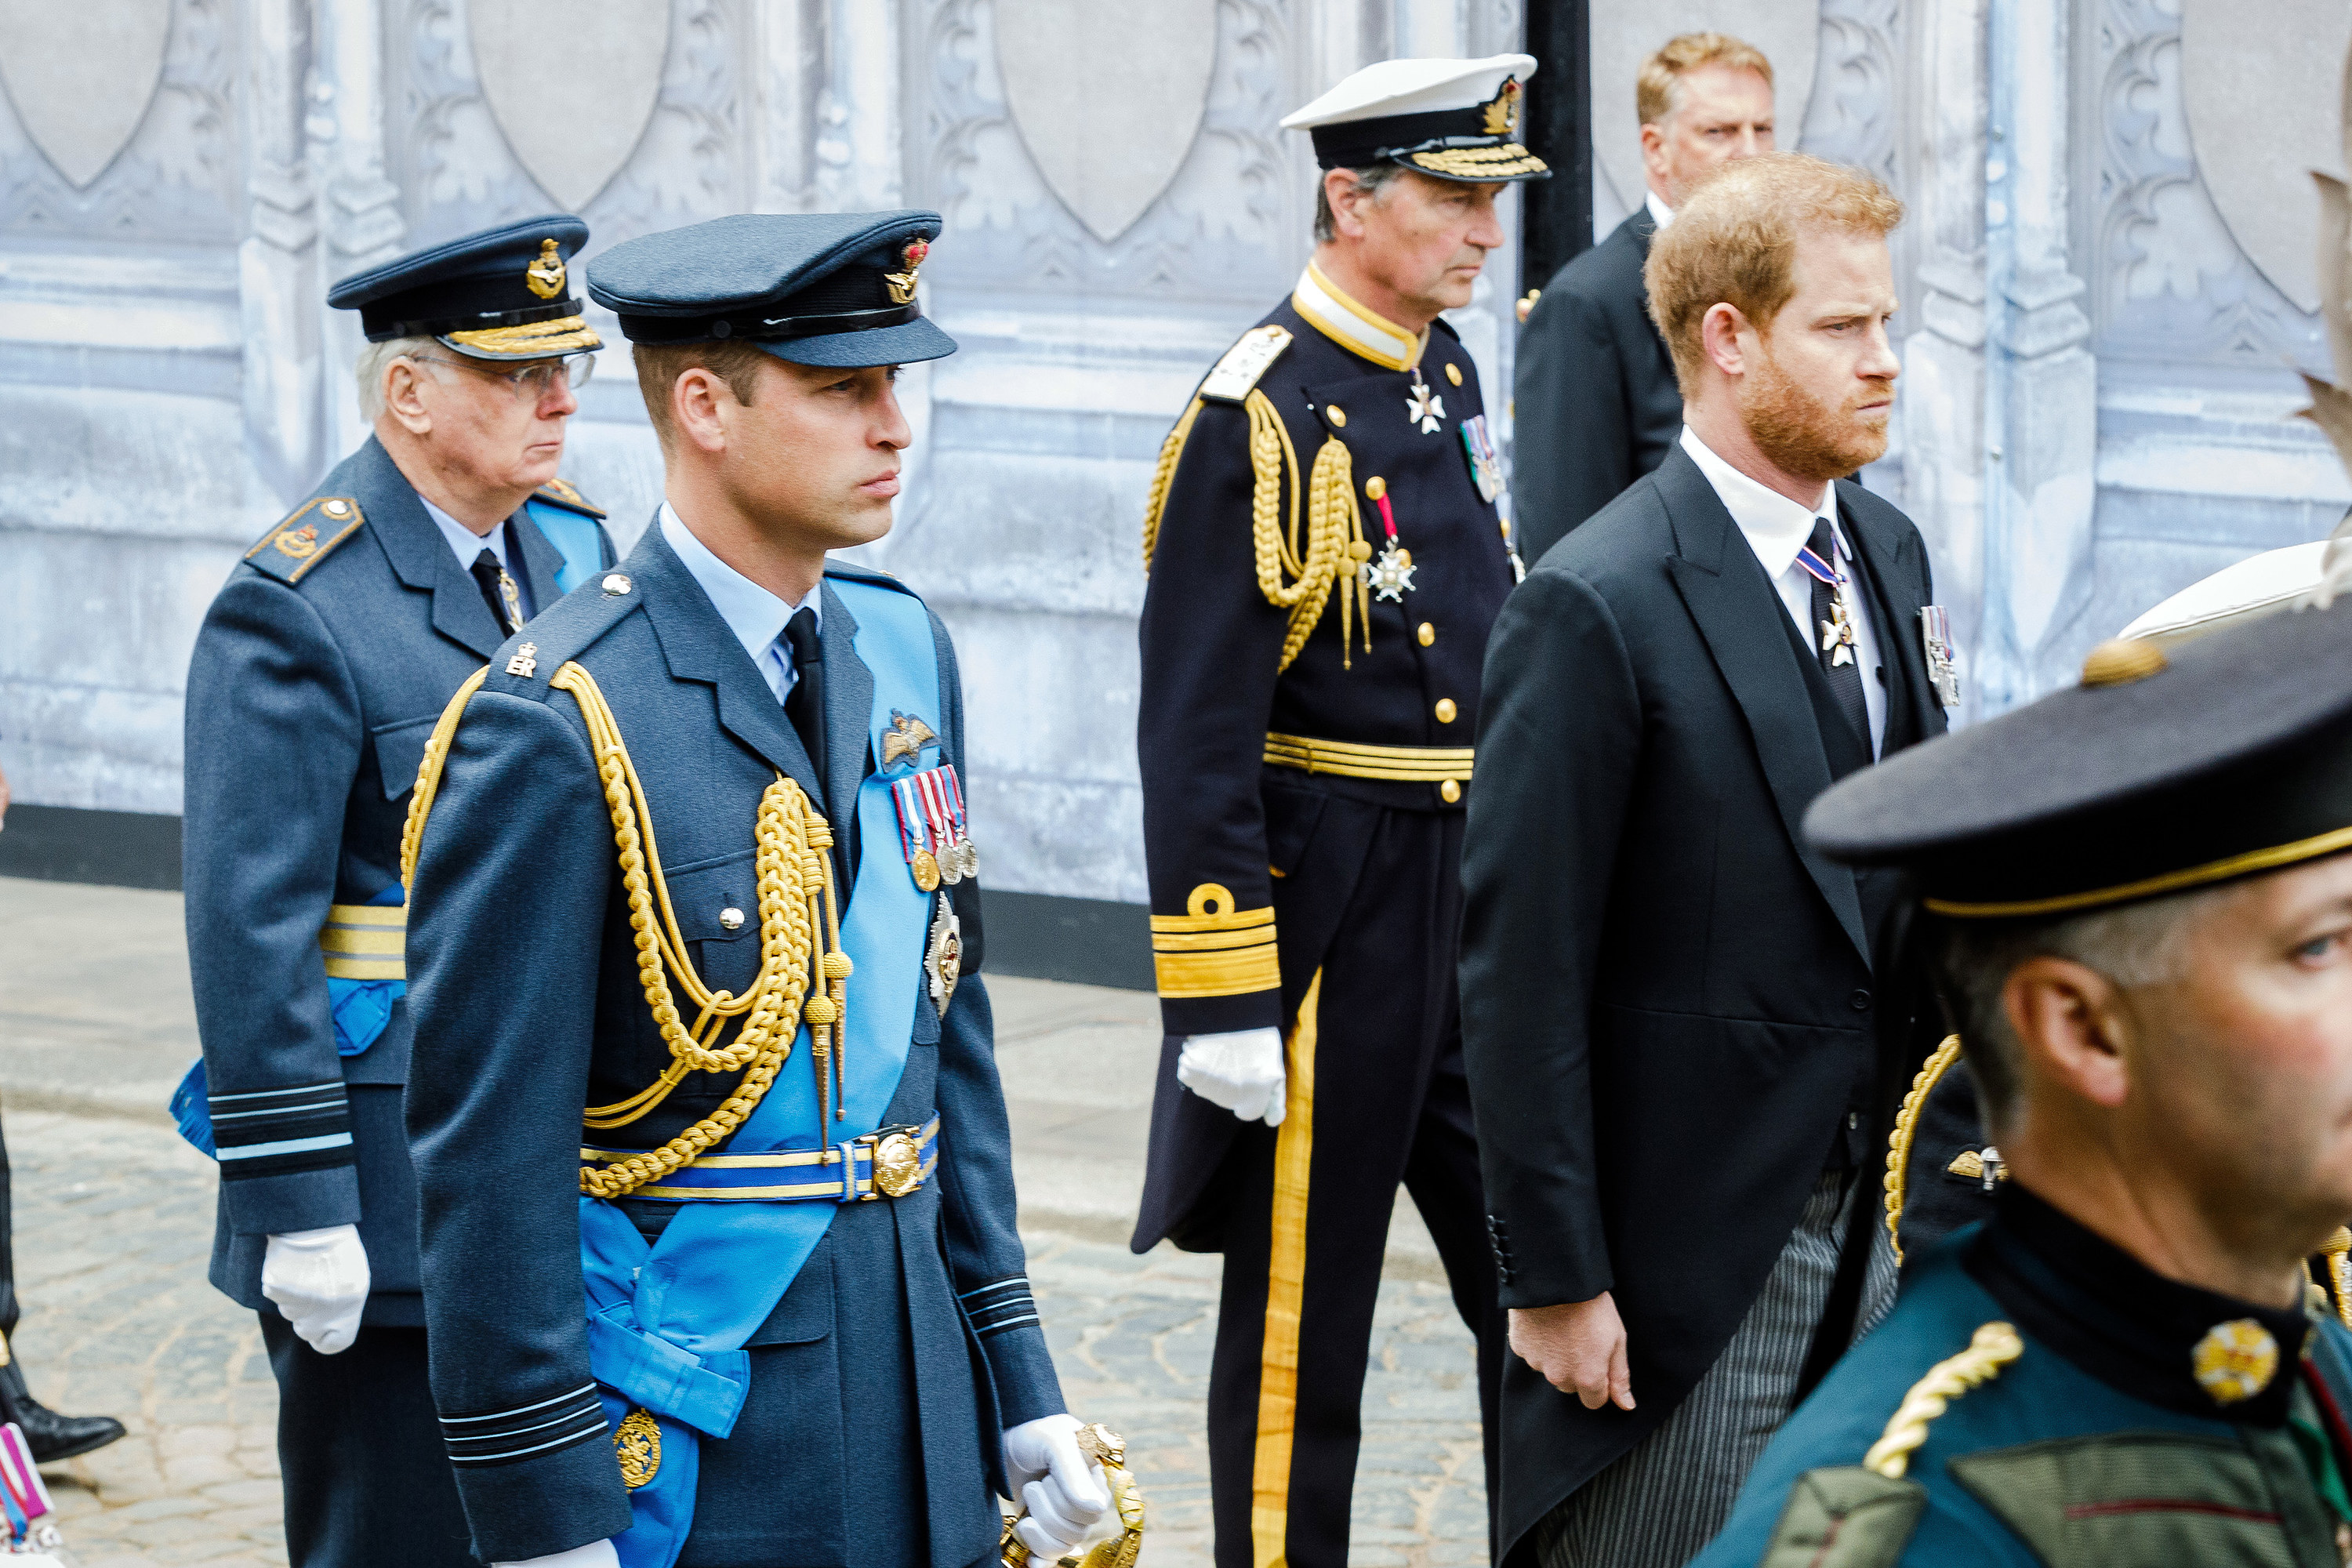 Prince Richard, Prince William, and Vice Admiral Tim Laurence in dress military and Prince Harry in a suit walk behind the Queen&#x27;s coffin at her state funeral